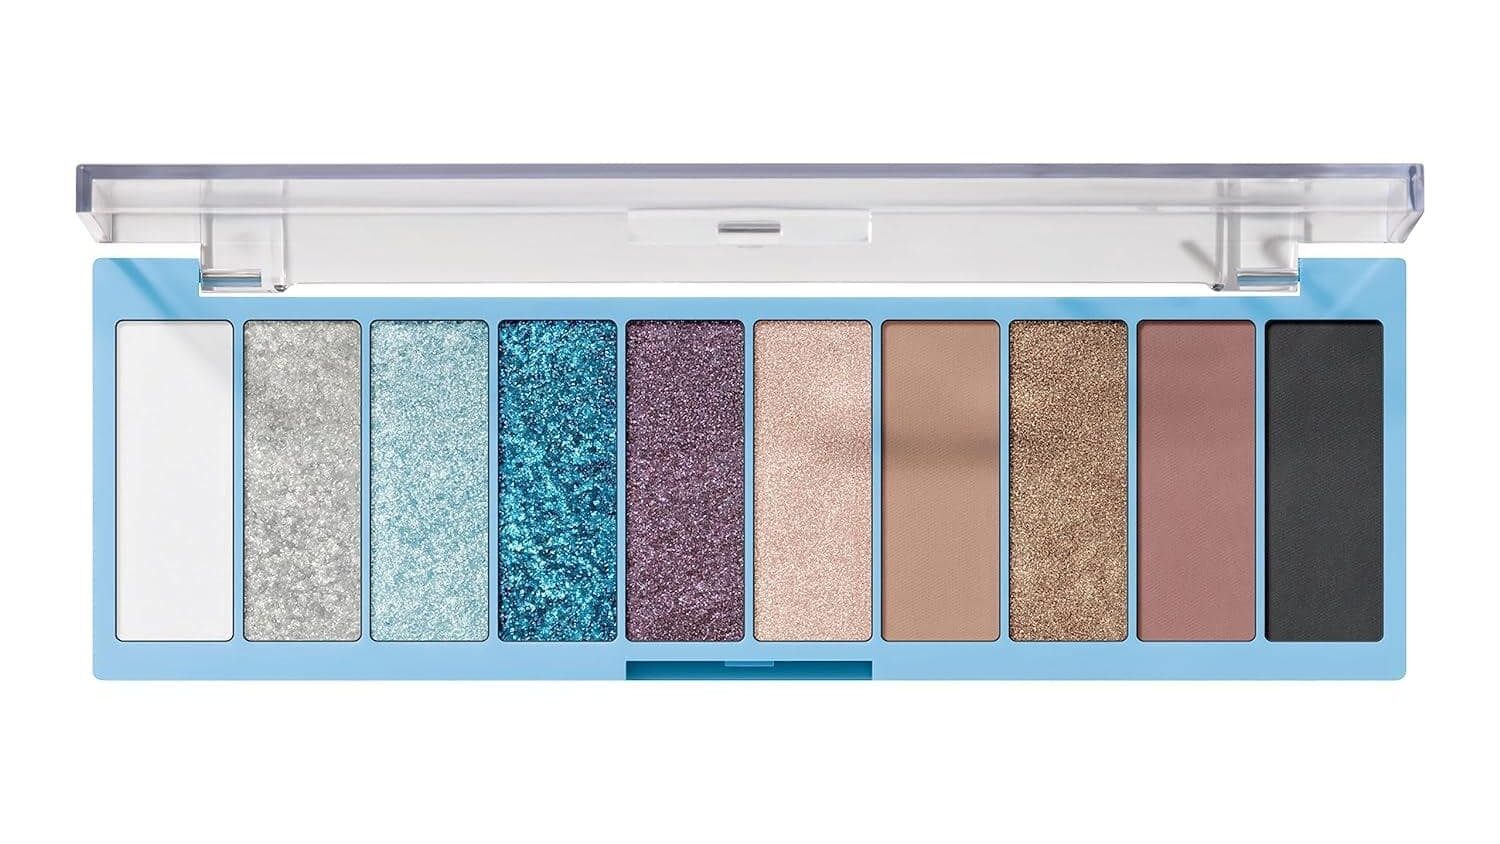 e.l.f. Perfect 10 Eyeshadow Palette! Priced at $12, this 10-color eye palette offers a kaleidoscope of blues and purples, encouraging creativity with its creamy, blendable formula. Eye-catching beauty at your fingertips!
